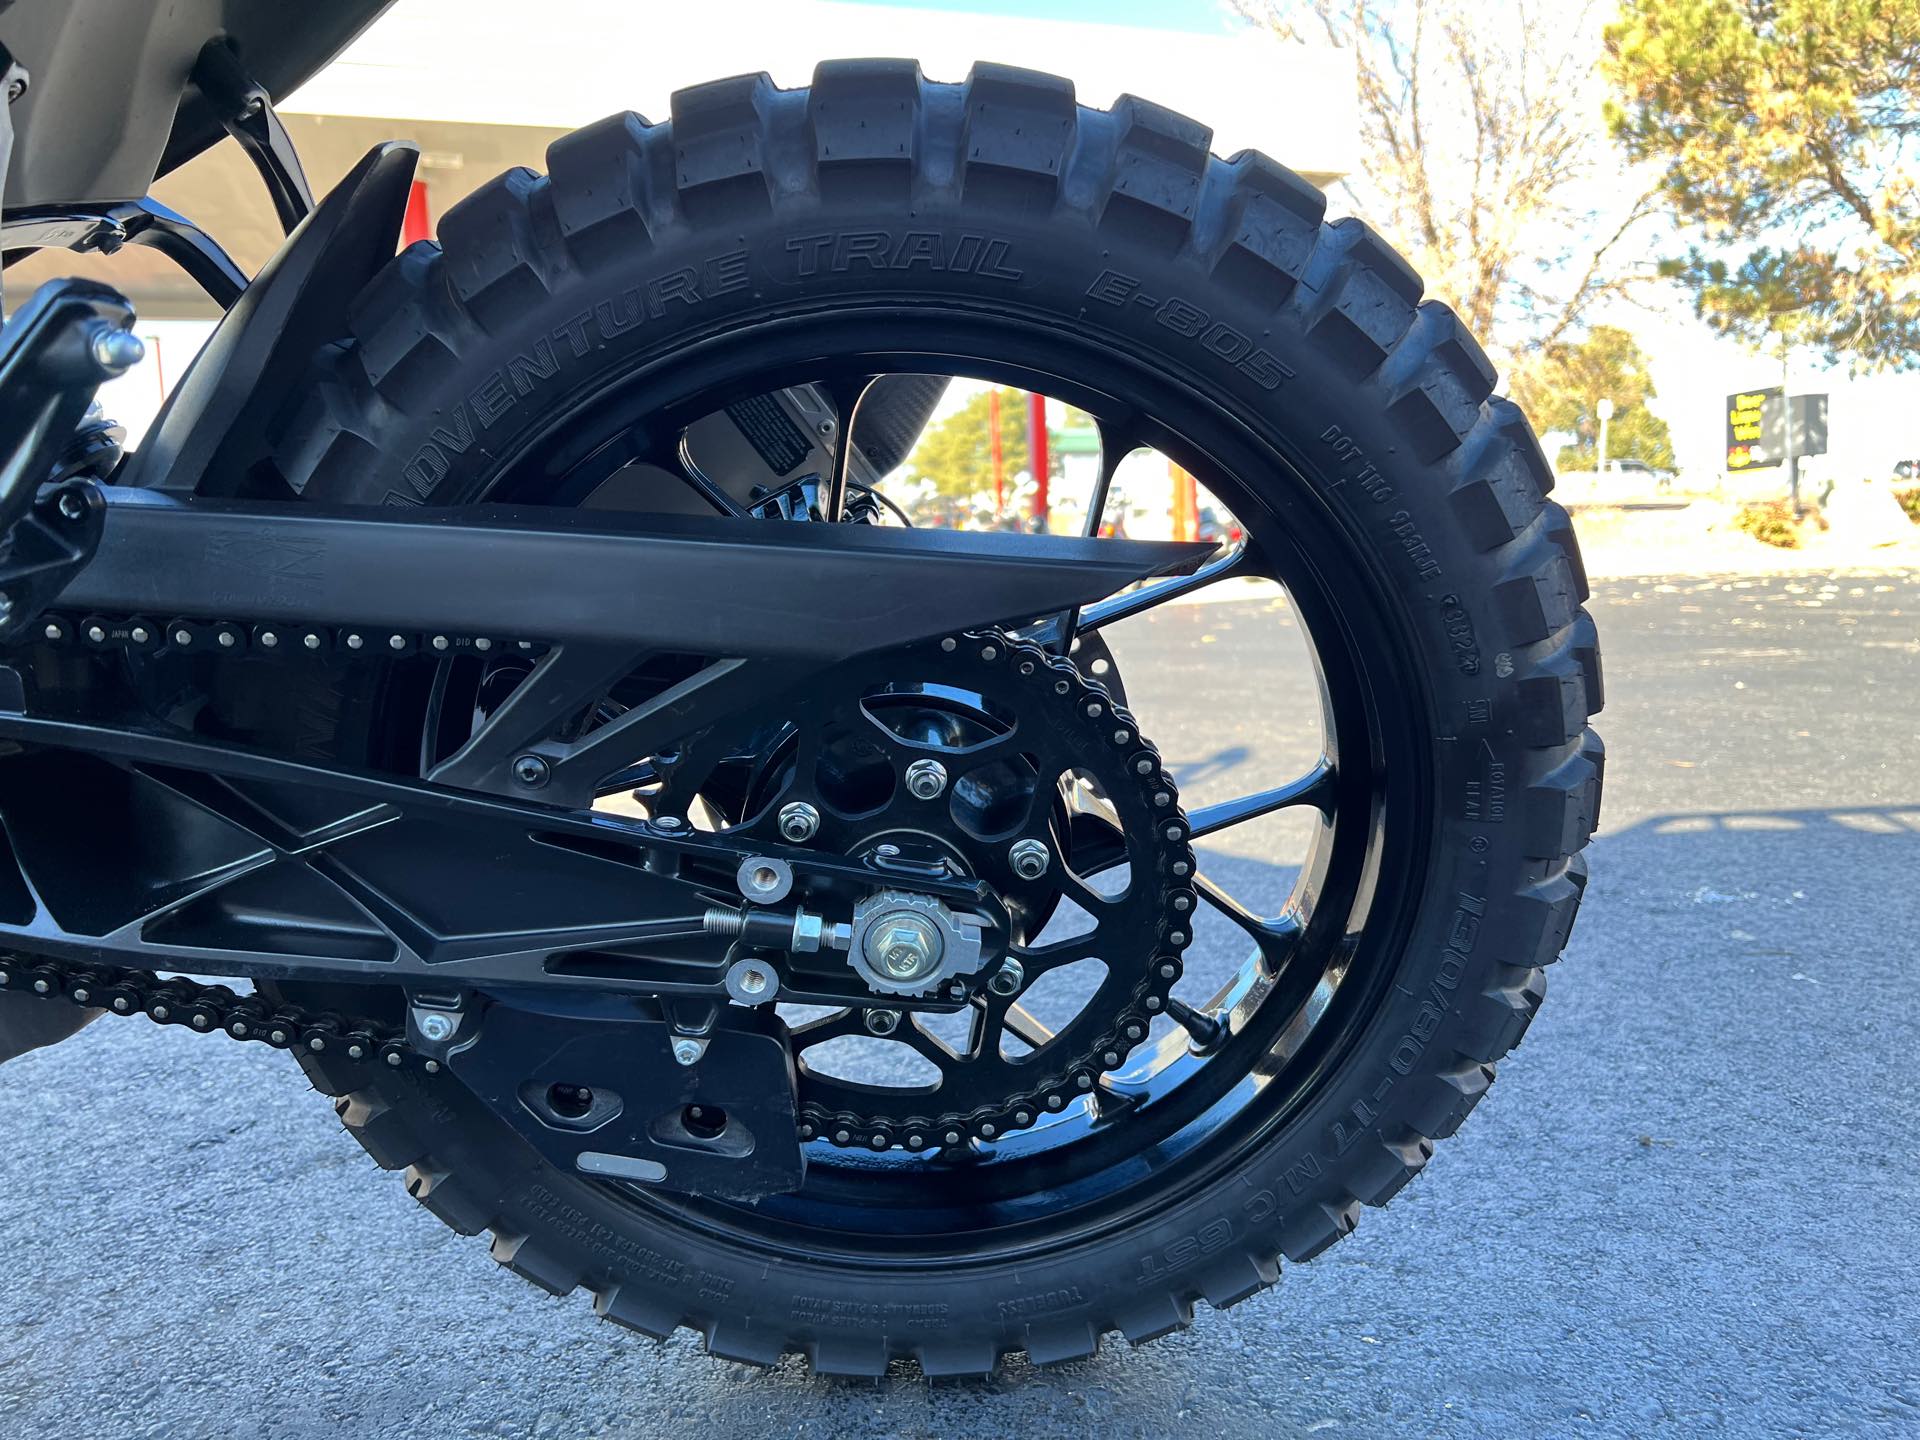 2020 KTM Duke 390 at Aces Motorcycles - Fort Collins